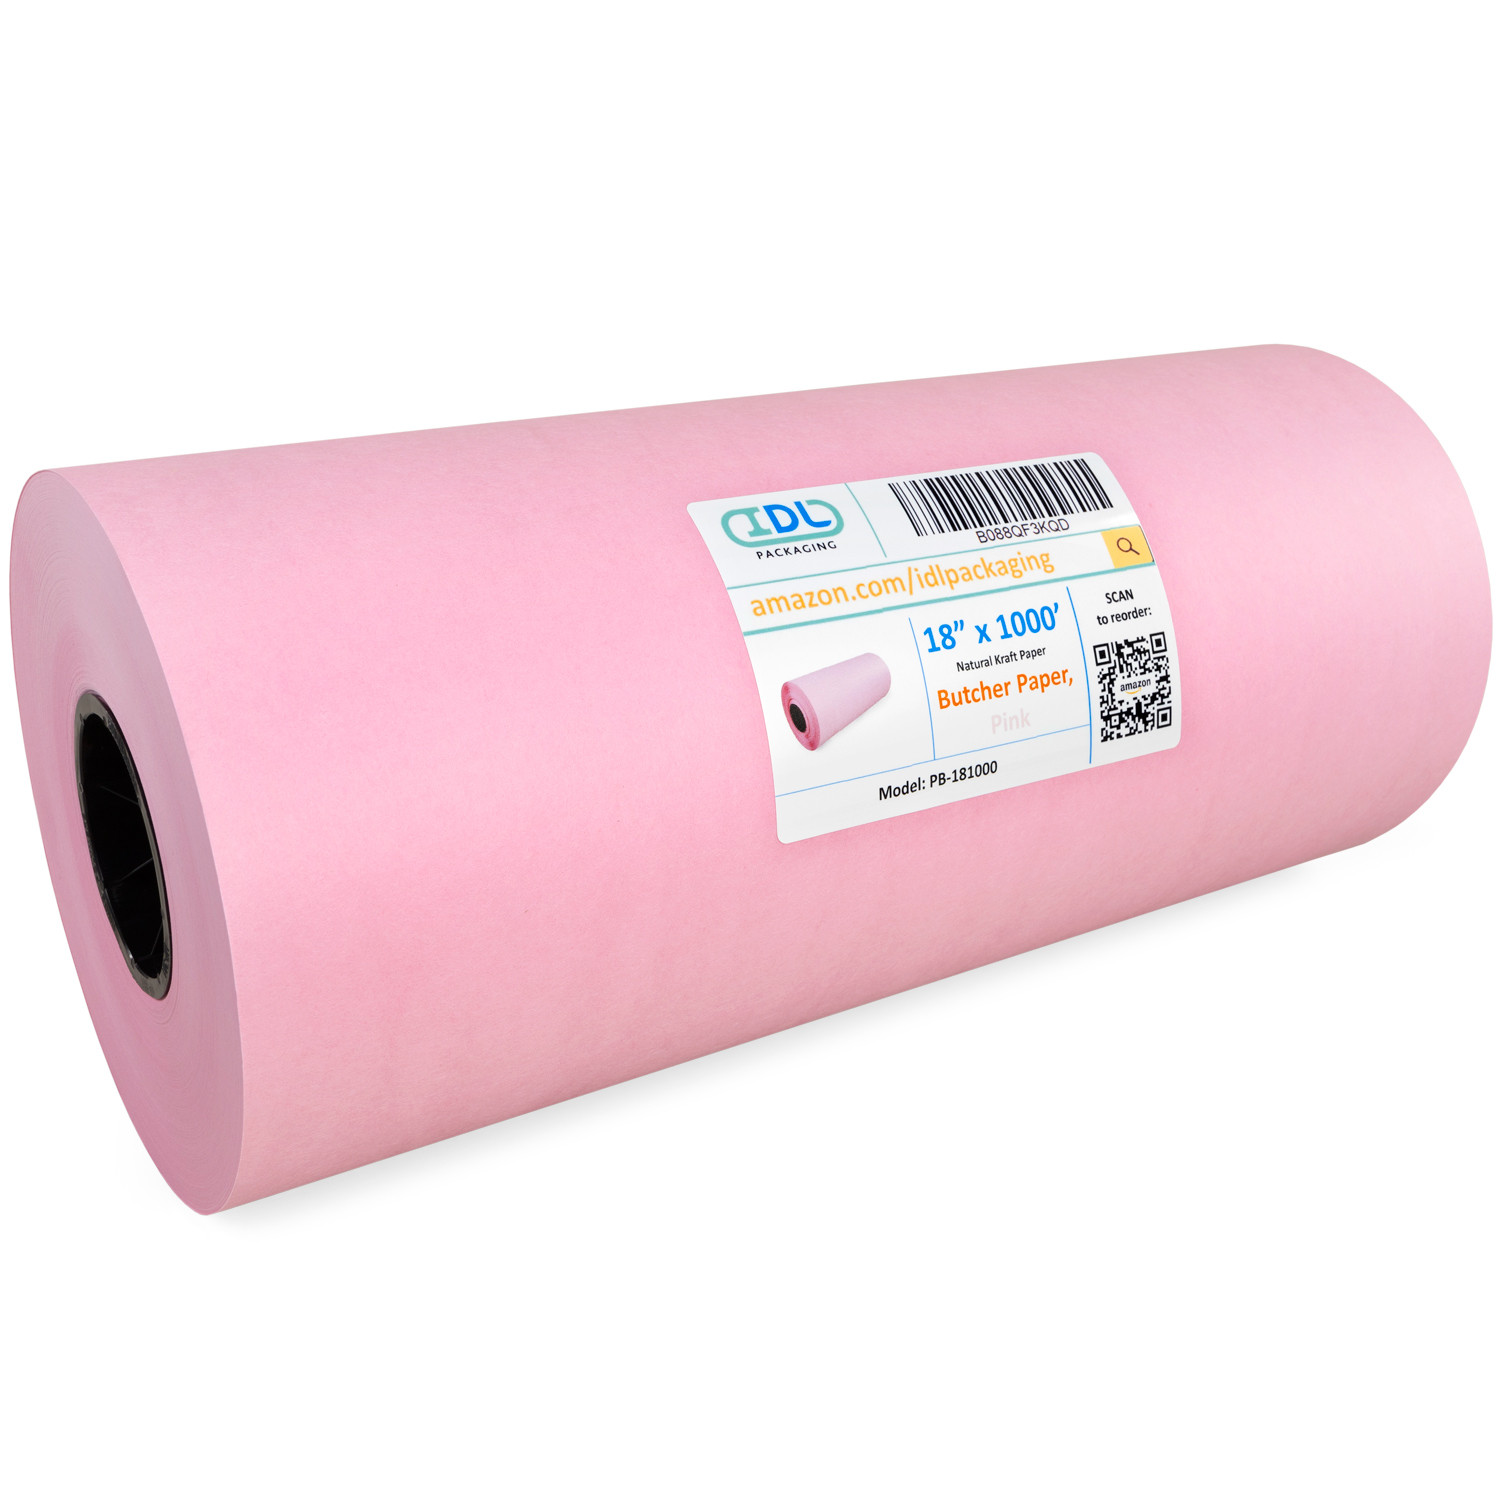 RW Base Pink / Peach 40# Butcher Paper Roll - 18 x 175' - 1 count box